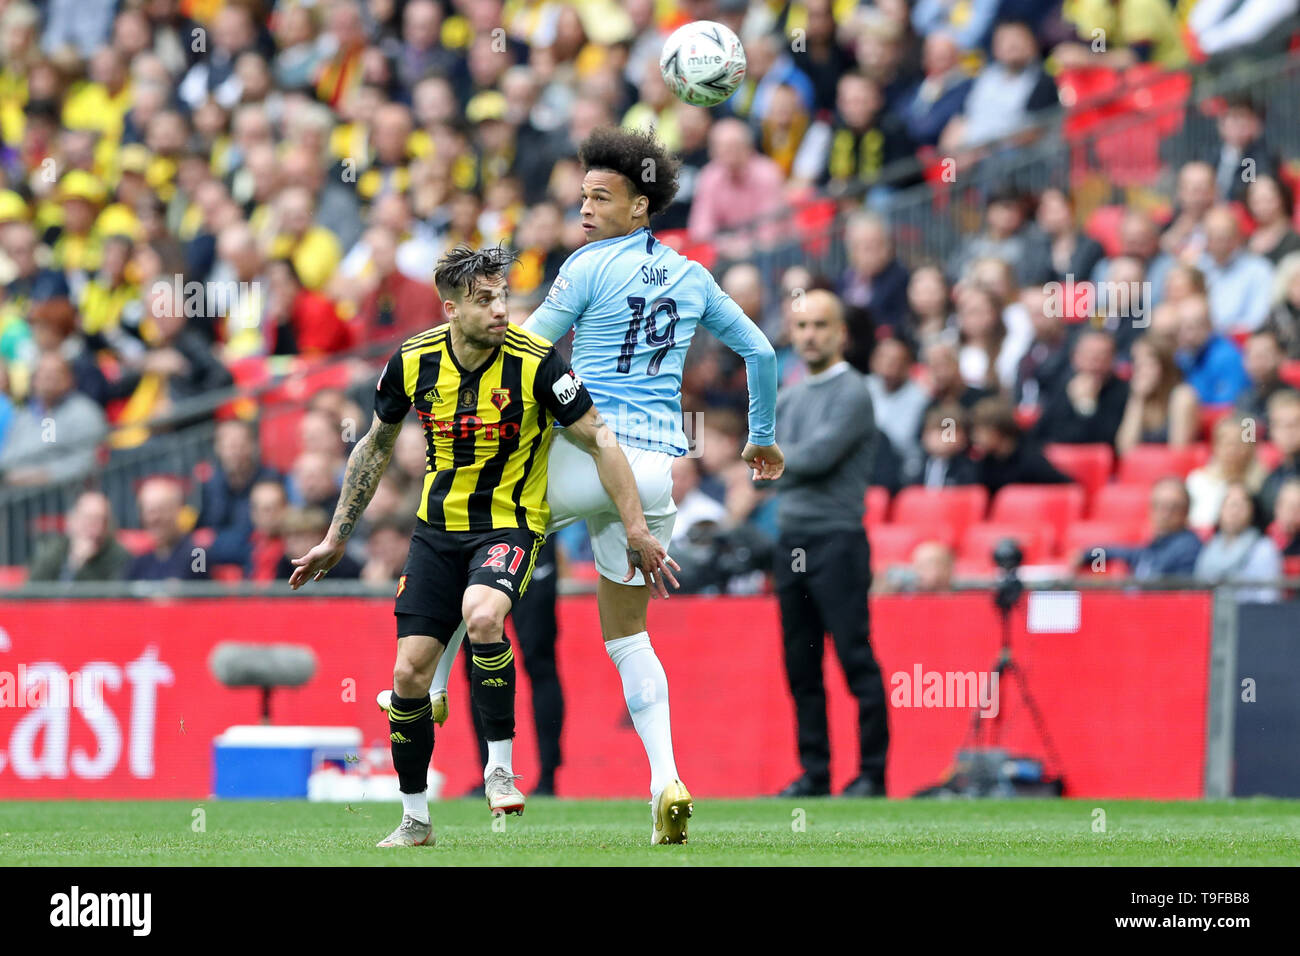 Leroy Sane High Resolution Stock Photography and Images - Alamy